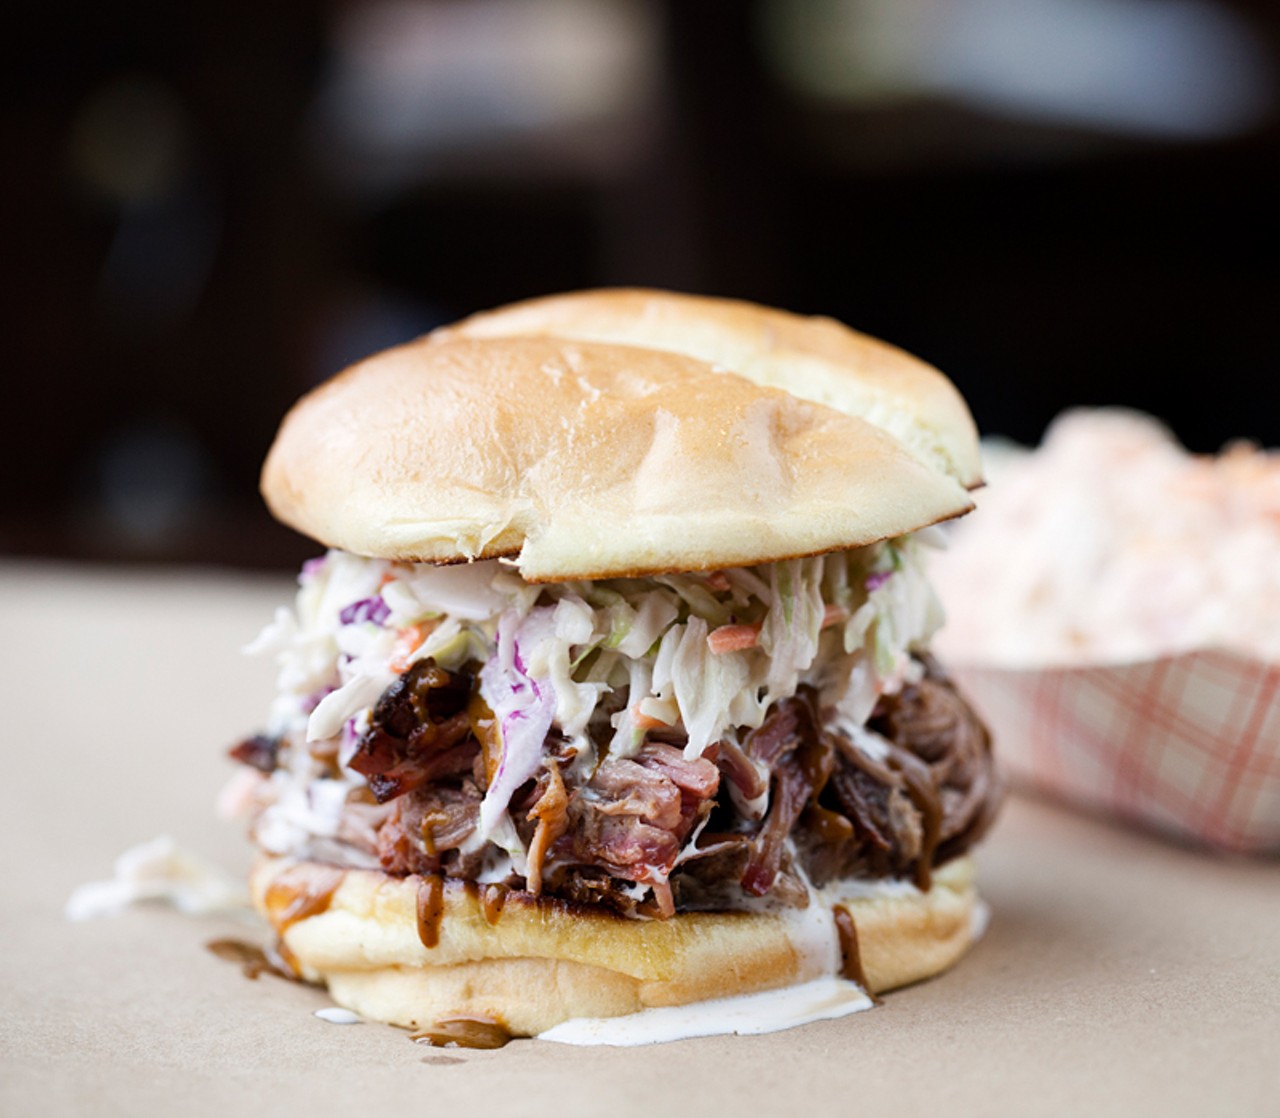 "The Carolina" comes with your choice of meat, cole slaw and mustard BBQ drizzle.